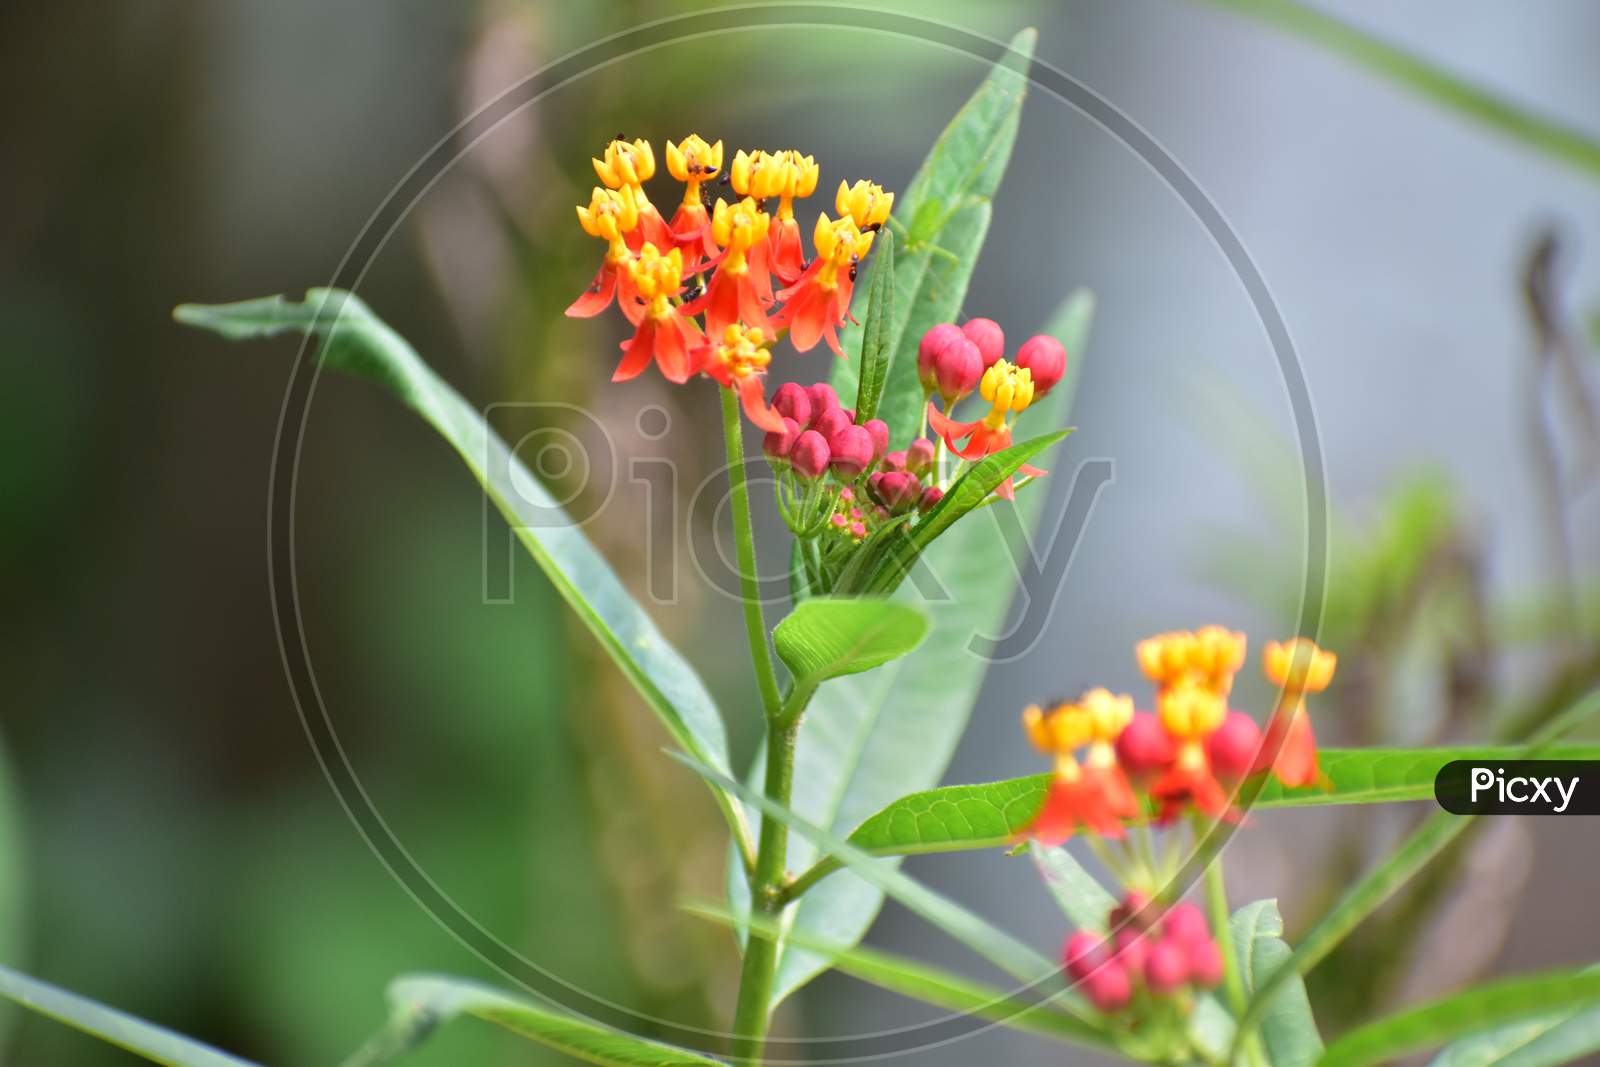 Mexican Butterfly Weed Flowering Plants With Colorful Flowers In Red And Yellow Colors . Small Ants Have Sat On The Flower